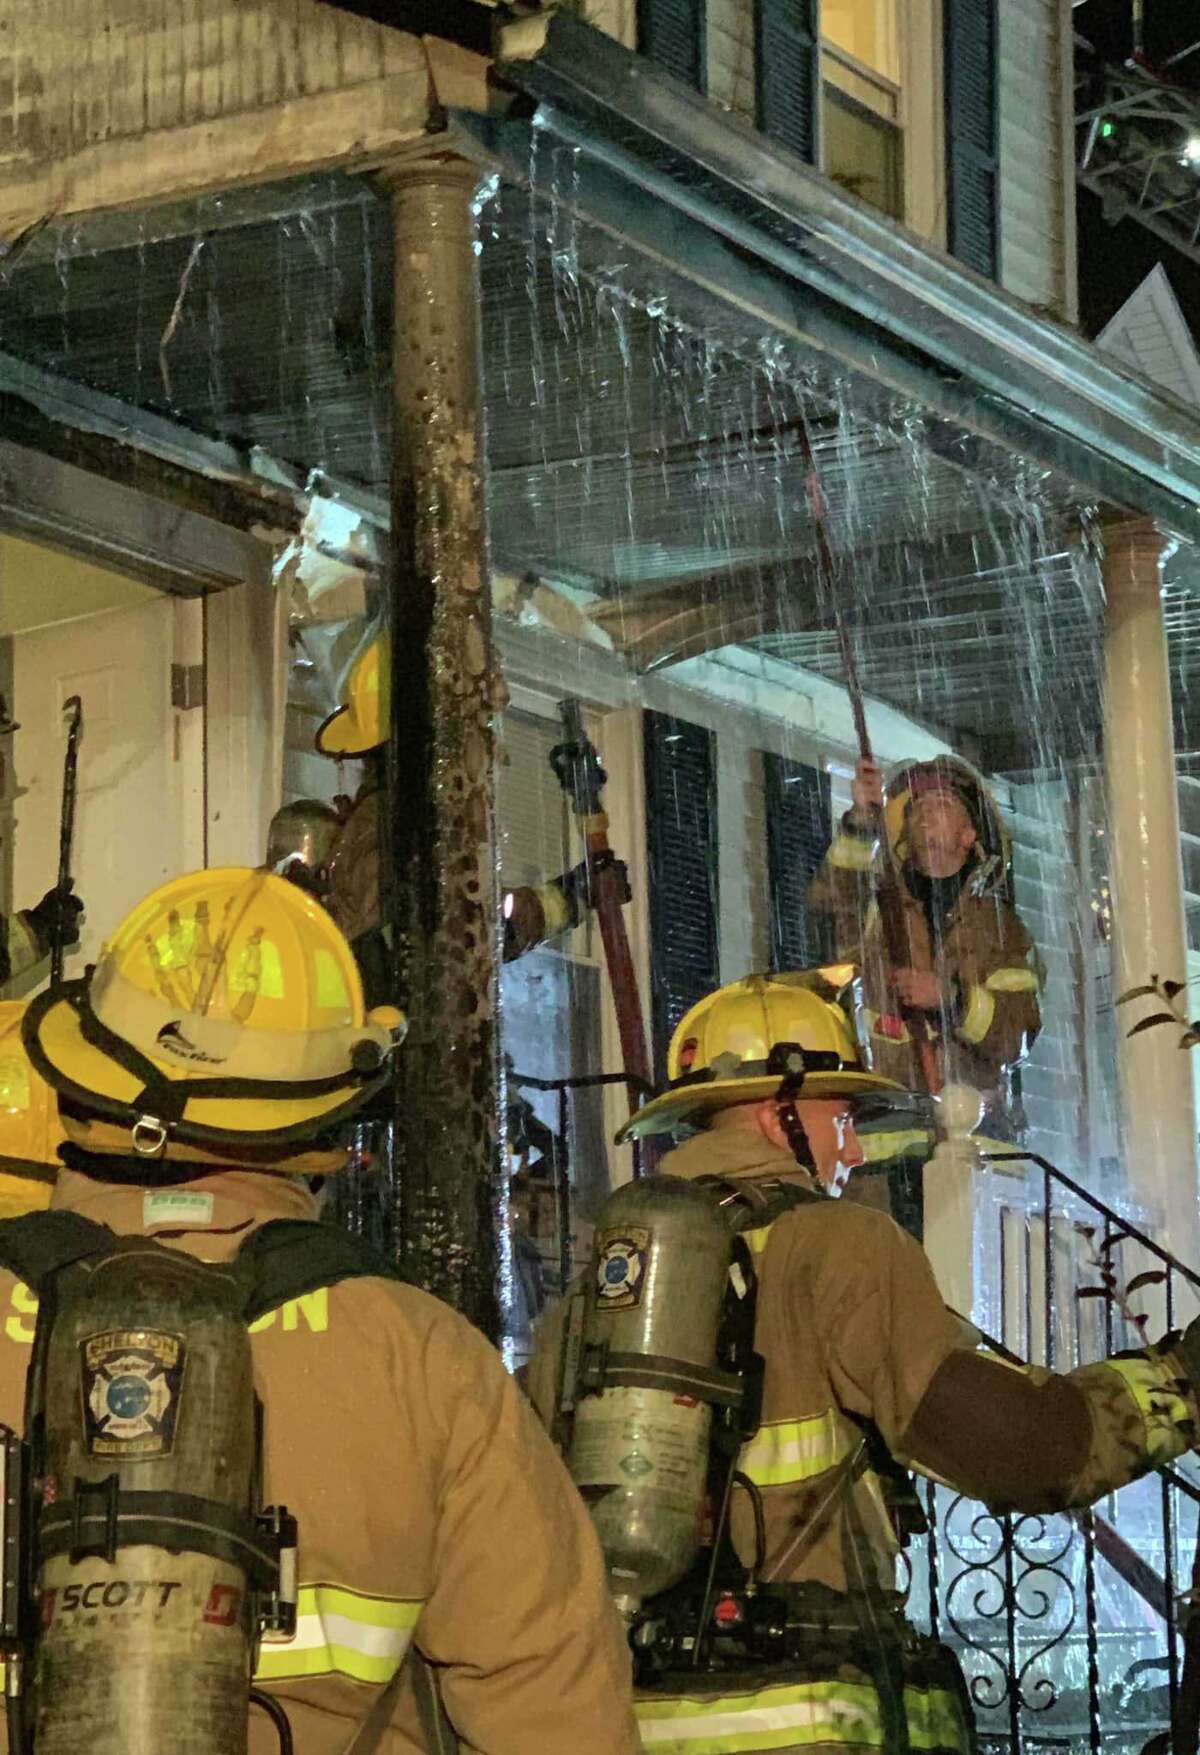 A porch fire at a Charles Street home in Shelton, Conn., on Thursday, Dec. 23, 2021, spread slightly inside on the first floor, according to fire officials.